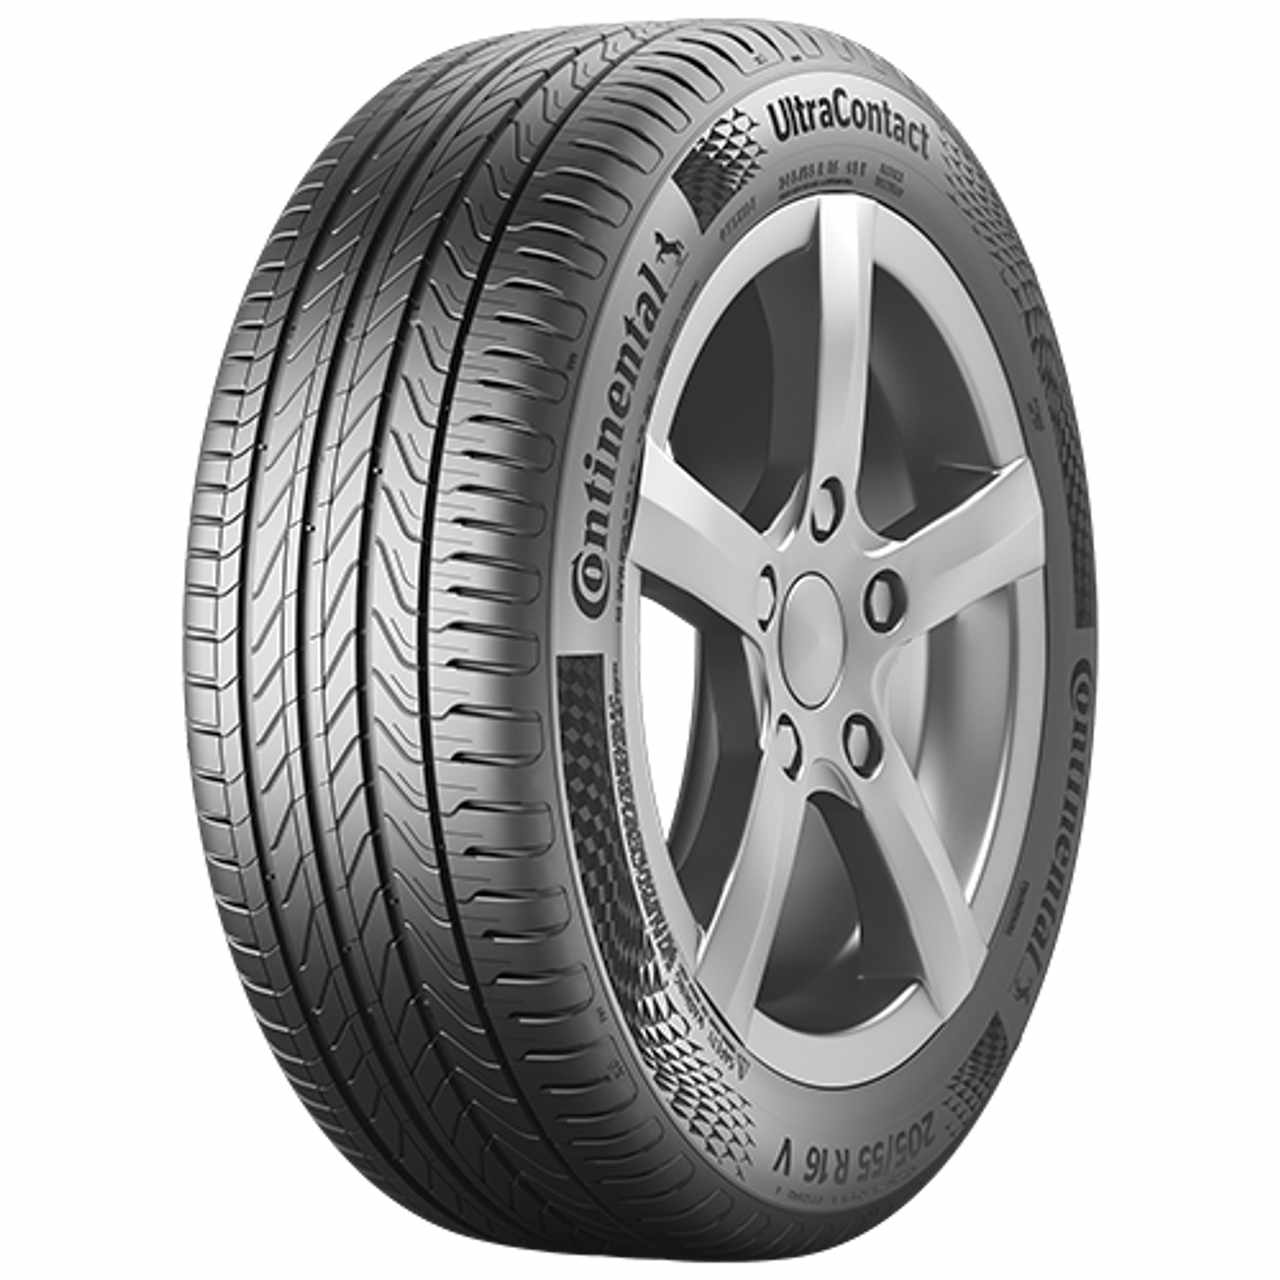 CONTINENTAL ULTRACONTACT (EVc) 205/60R17 97W FR BSW von Continental